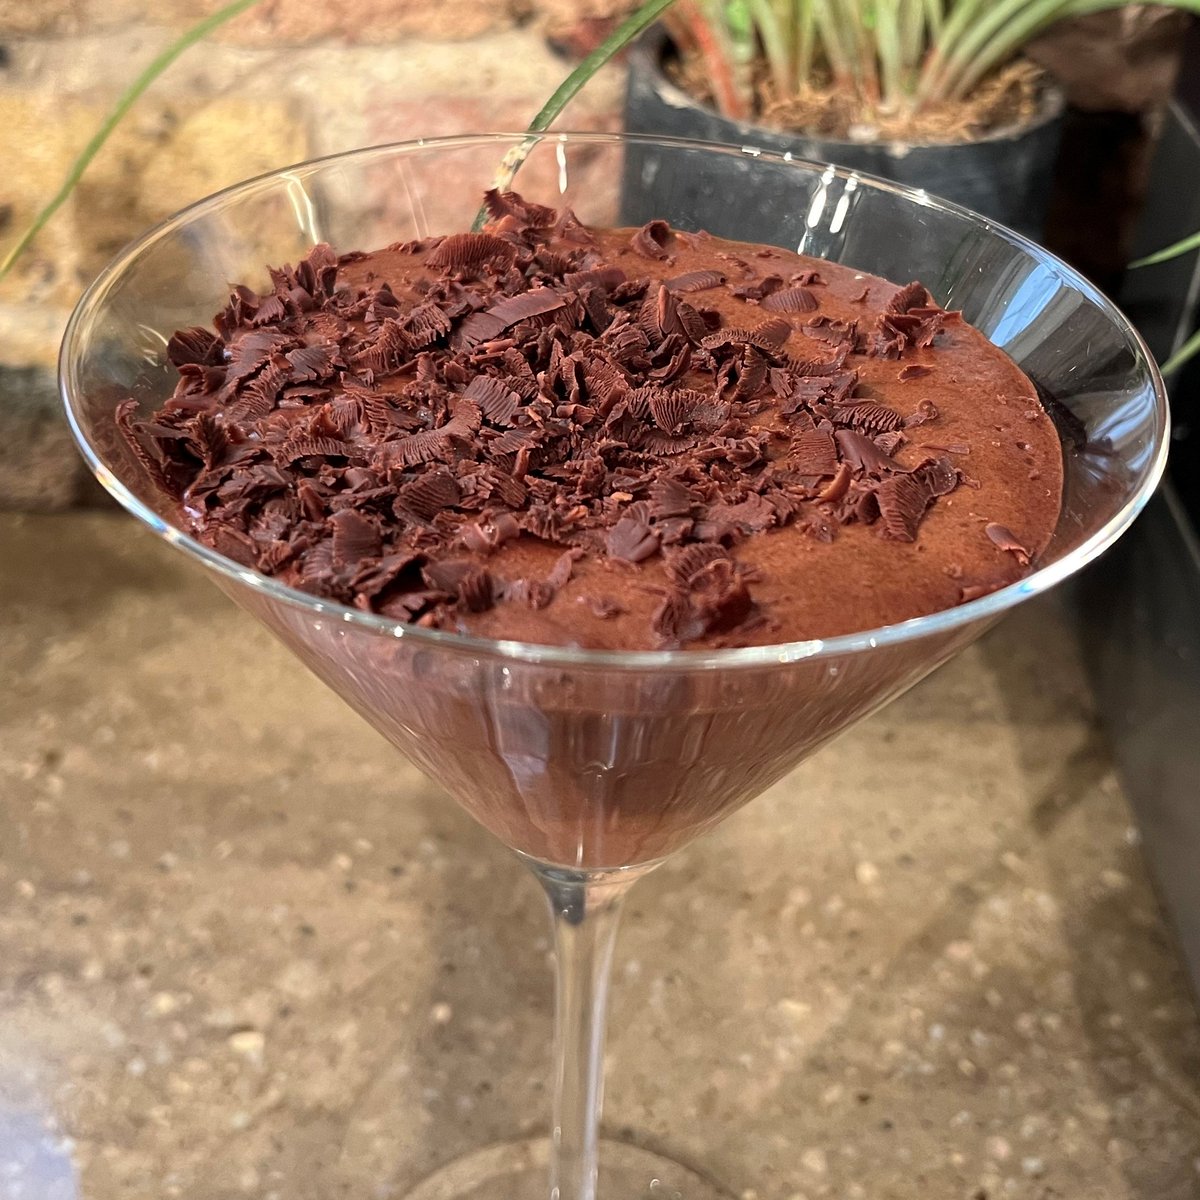 A round of applause for Paul A. Young's chocolate mousse masterclass!👏 Let's bring back the forgotten dinner party dessert back!🍫 If you fancy making, head to the @BBCFood website for @paul_a_young's recipe bbc.co.uk/saturdaykitchen and send us a photo if you do!